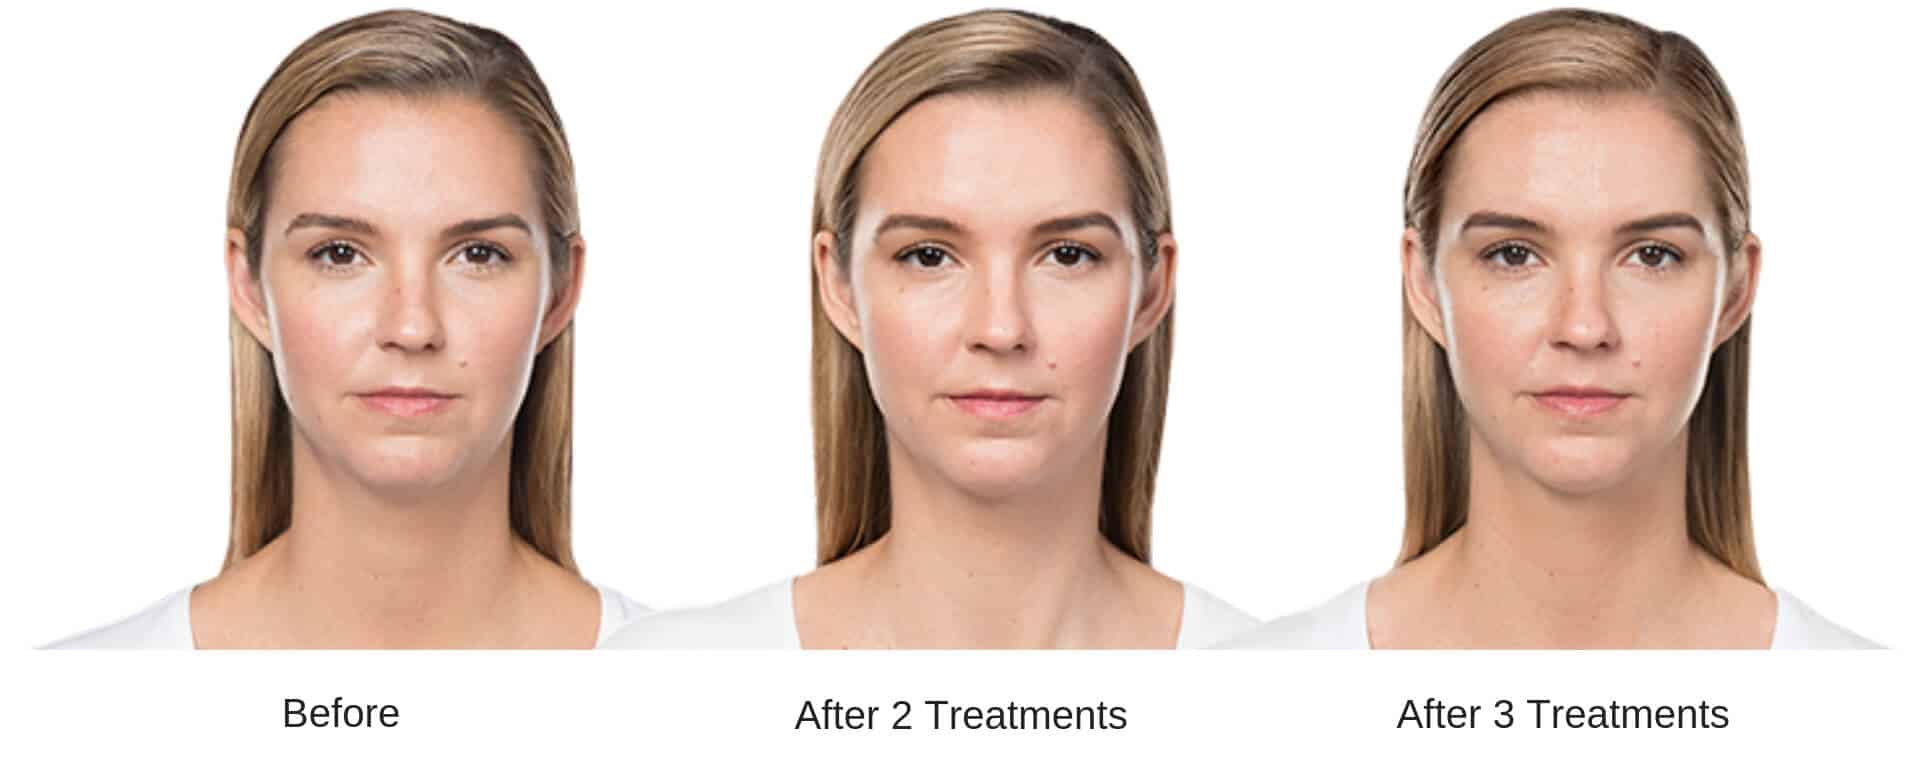 Woman's before and after results from Kybella treatment.